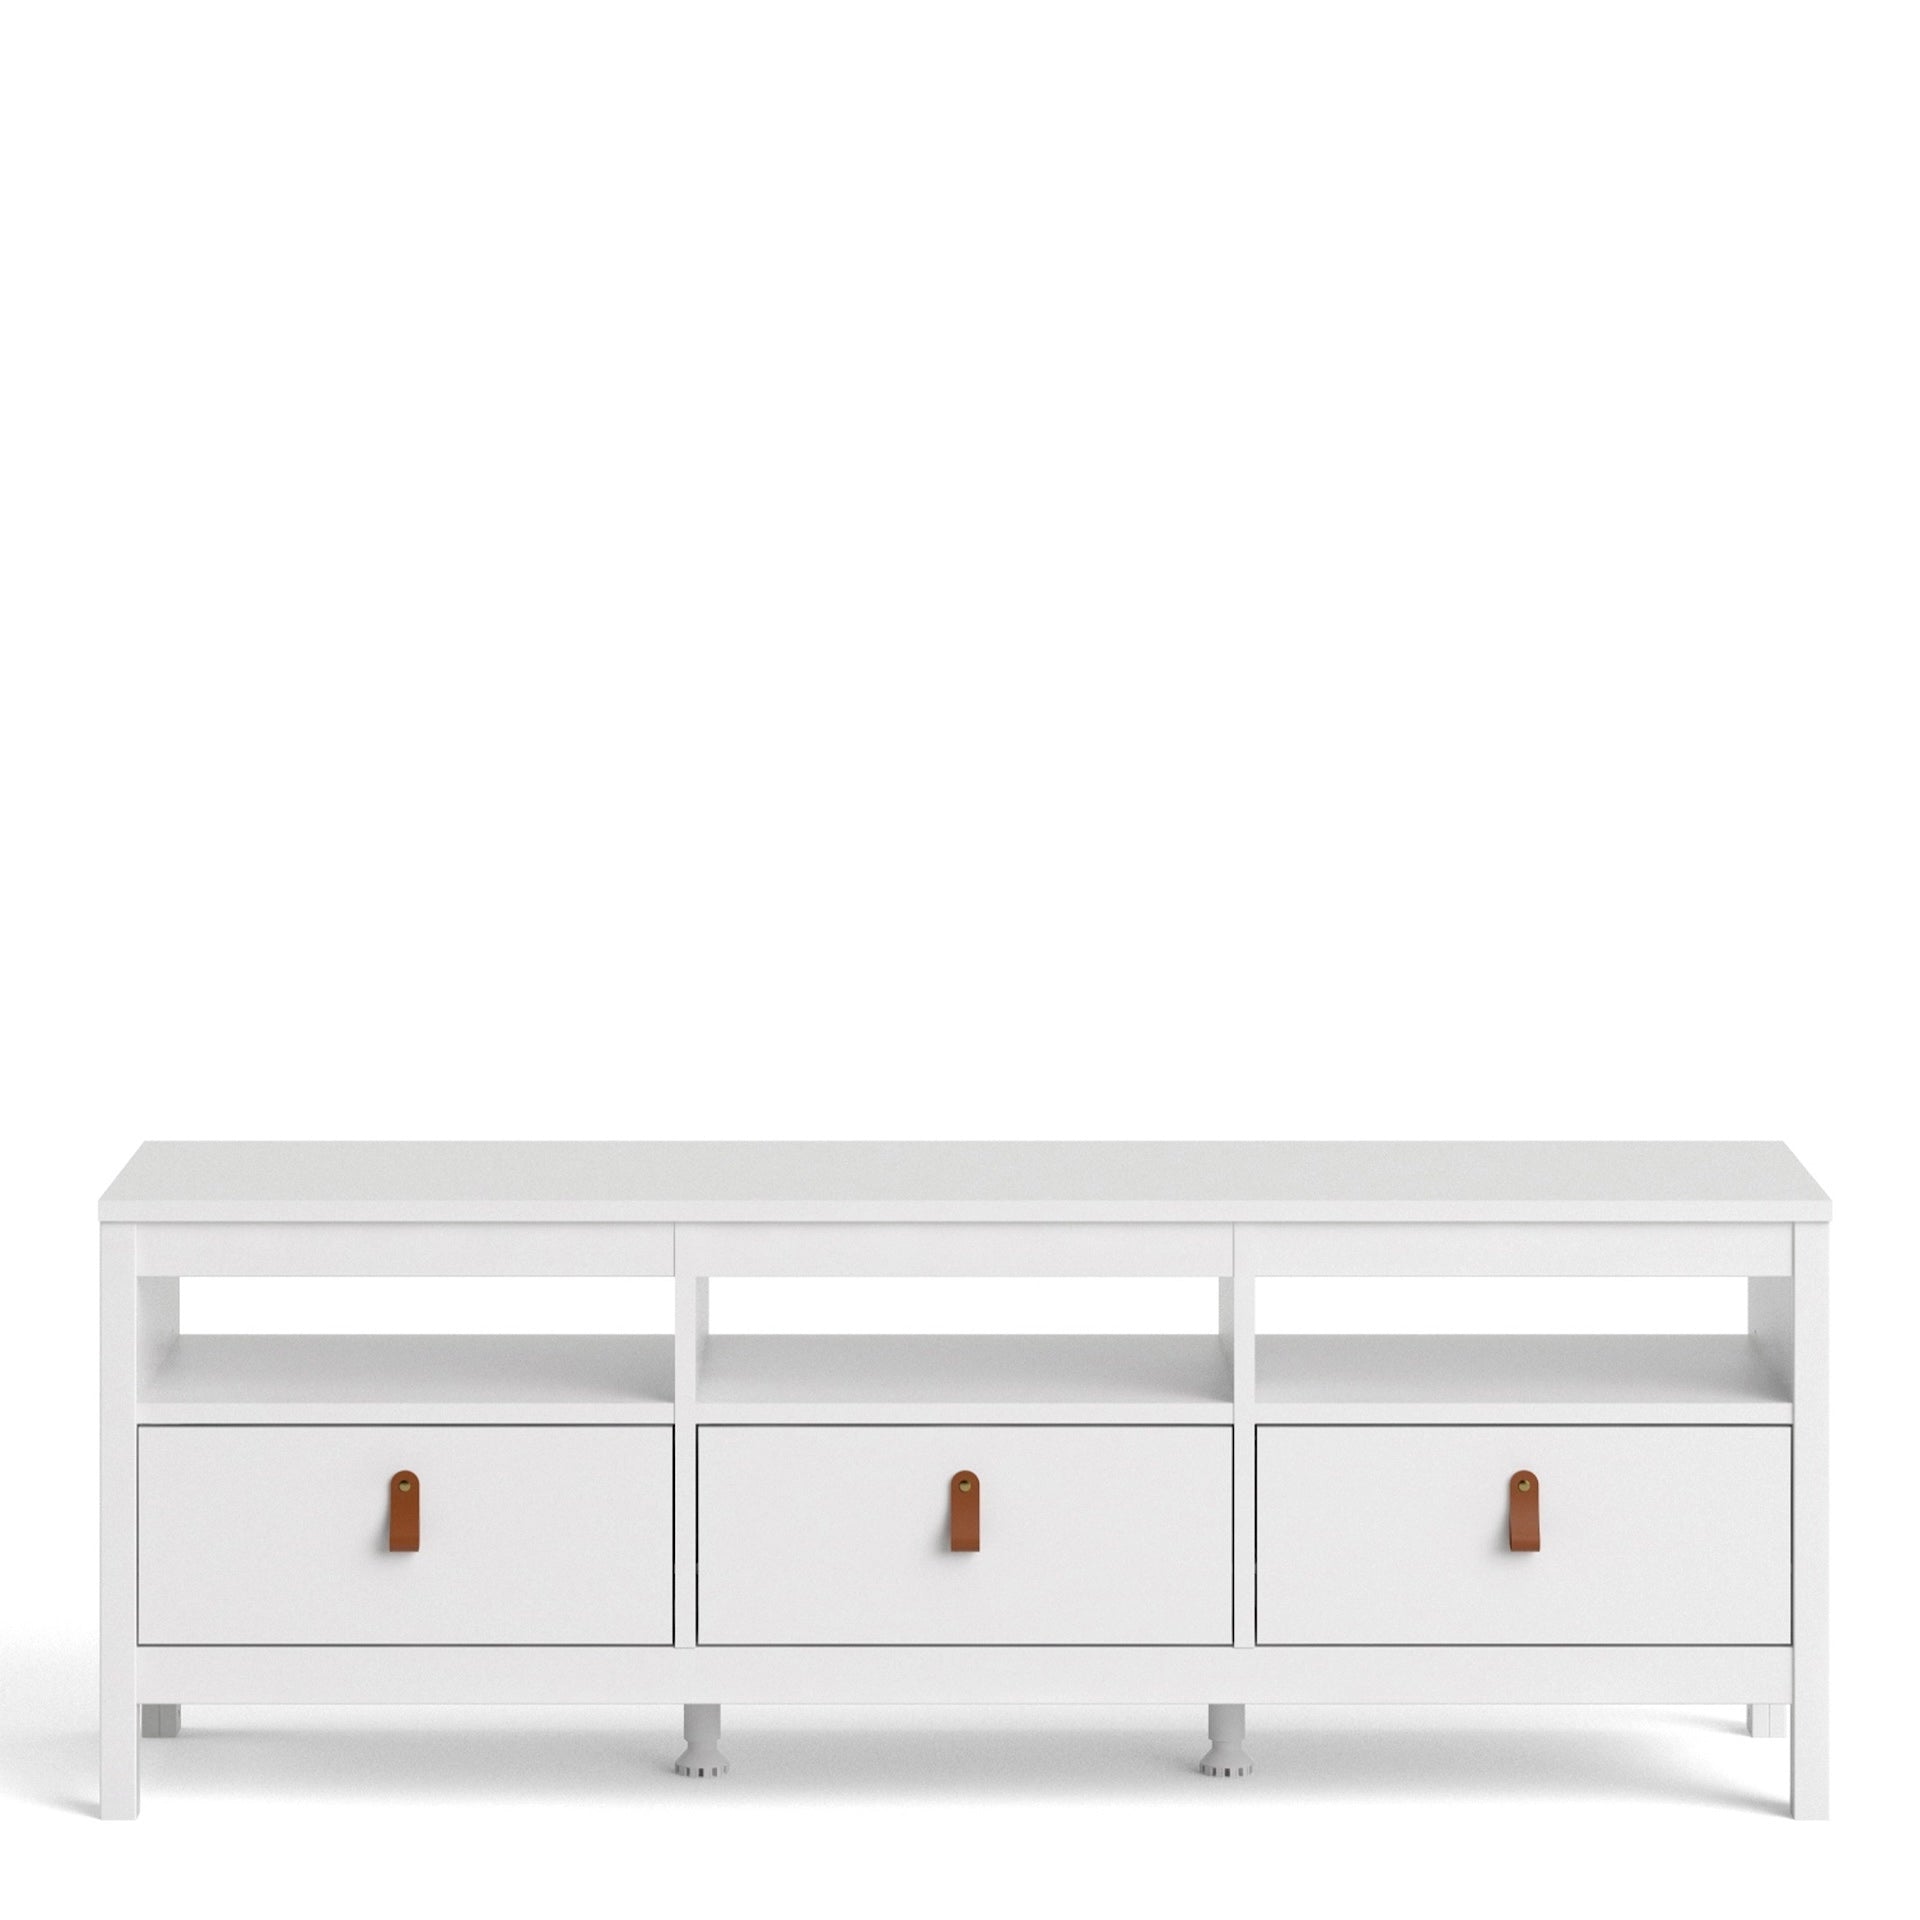 Furniture To Go Barcelona TV-Unit 3 Drawers in White